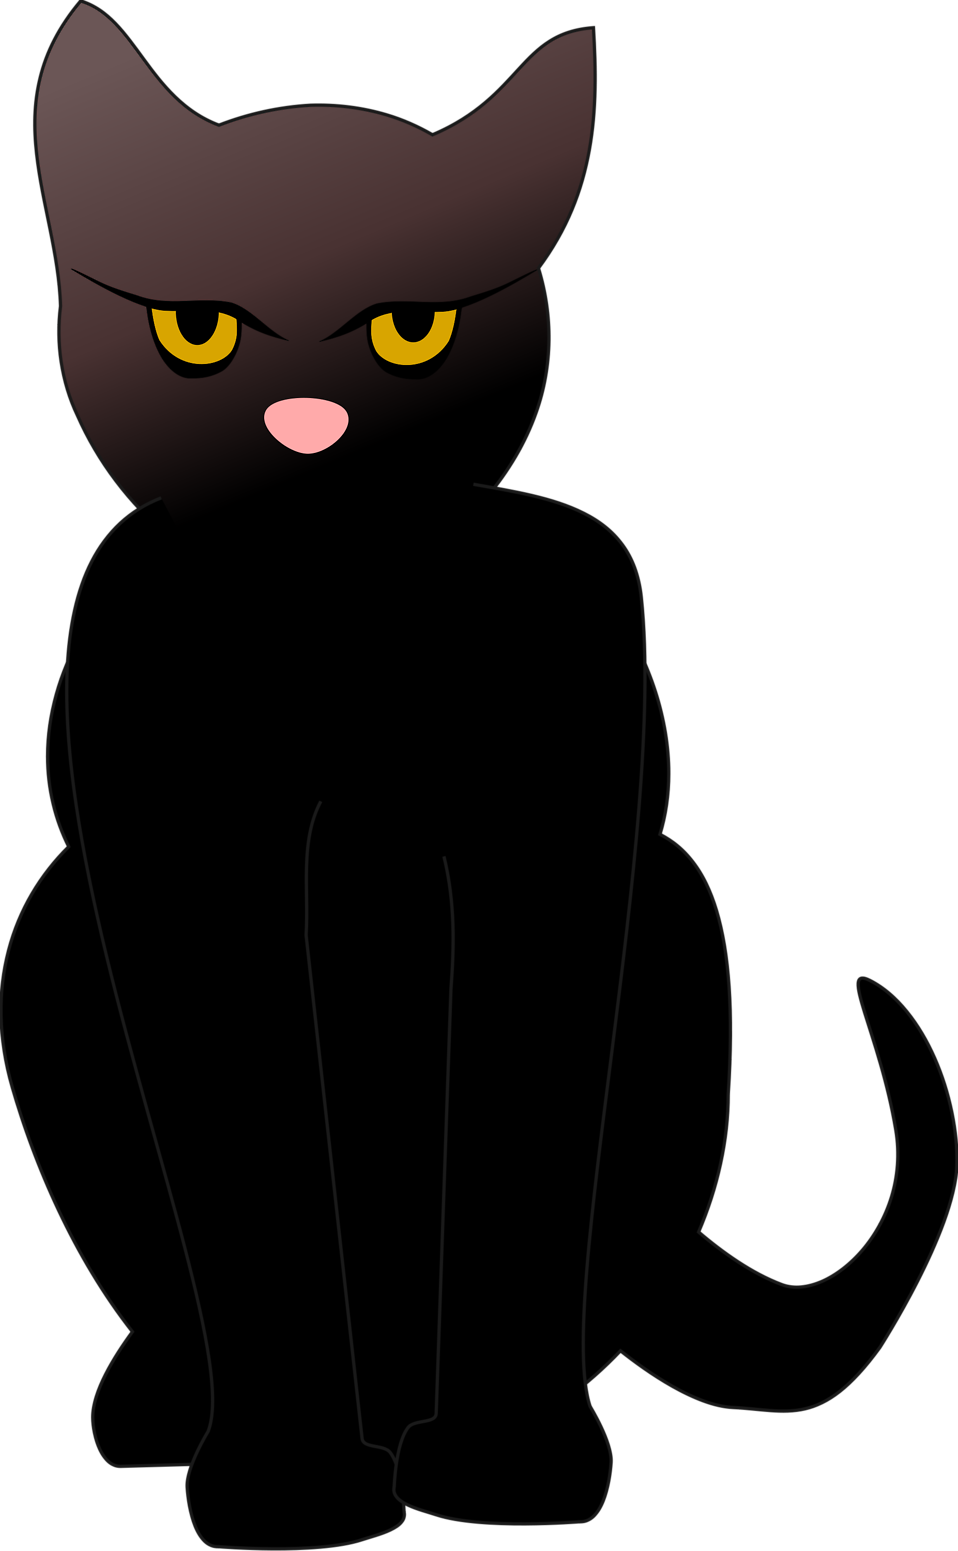 Cat Black | Free Stock Photo | Illustrated silhouette of a black ...